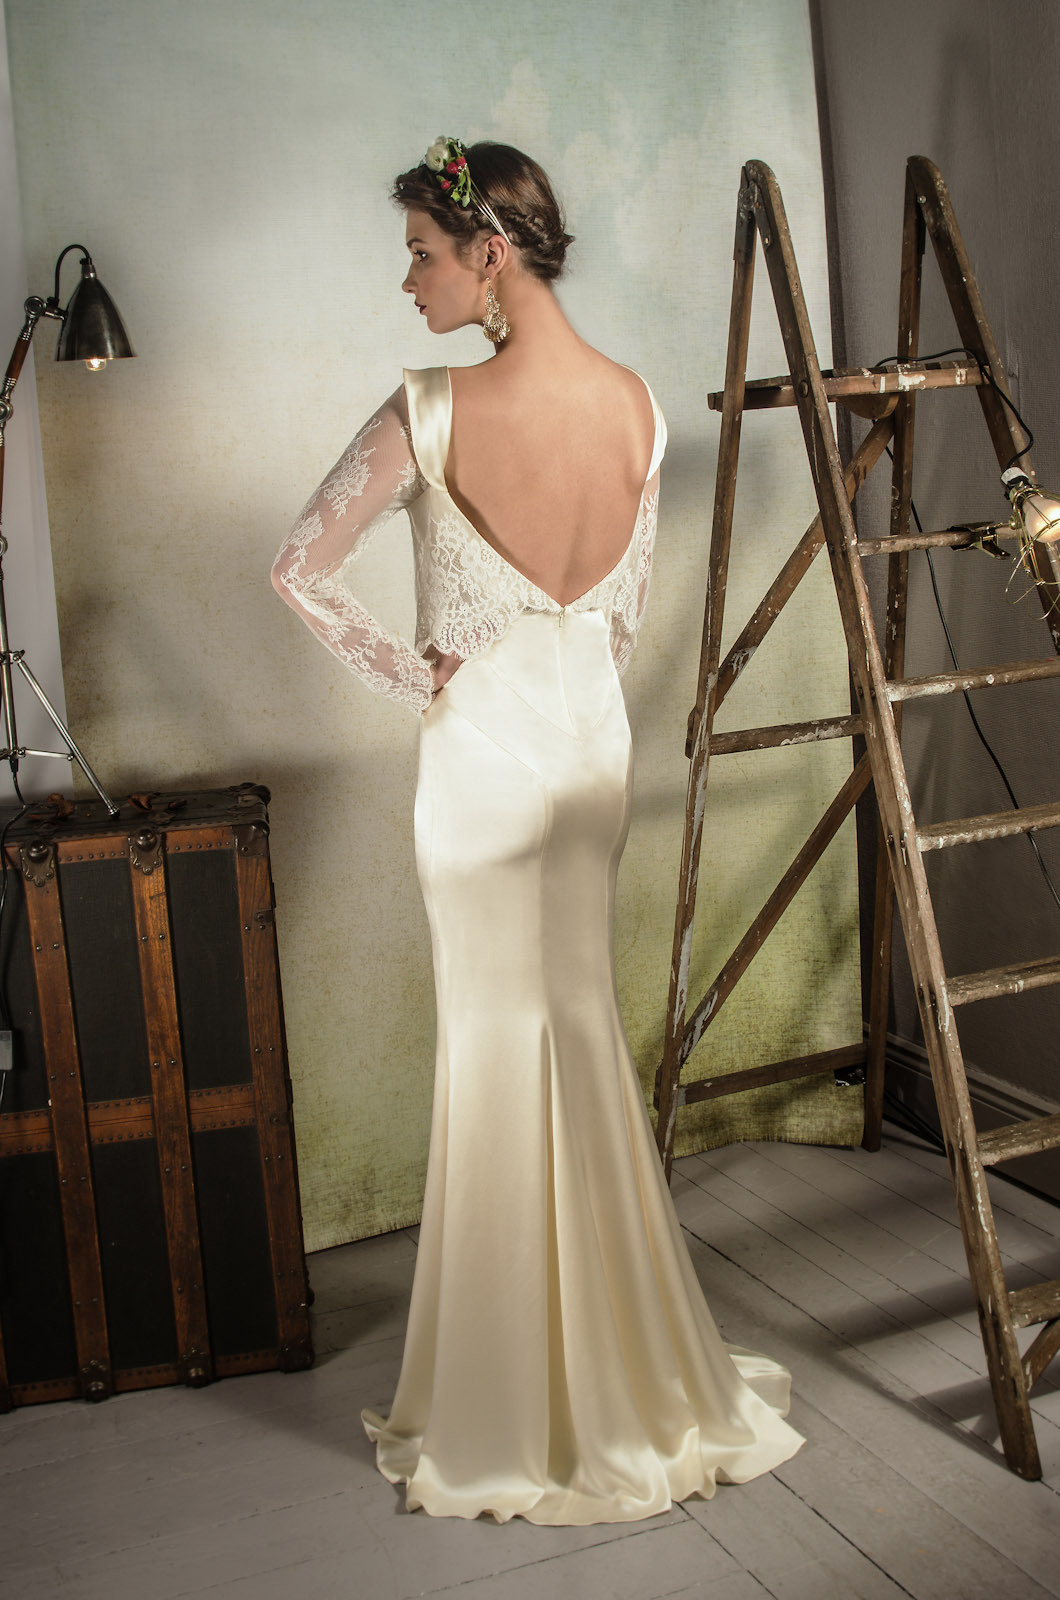 Belle & Bunty's 2014 Bridal Capsule Collection - Valentina